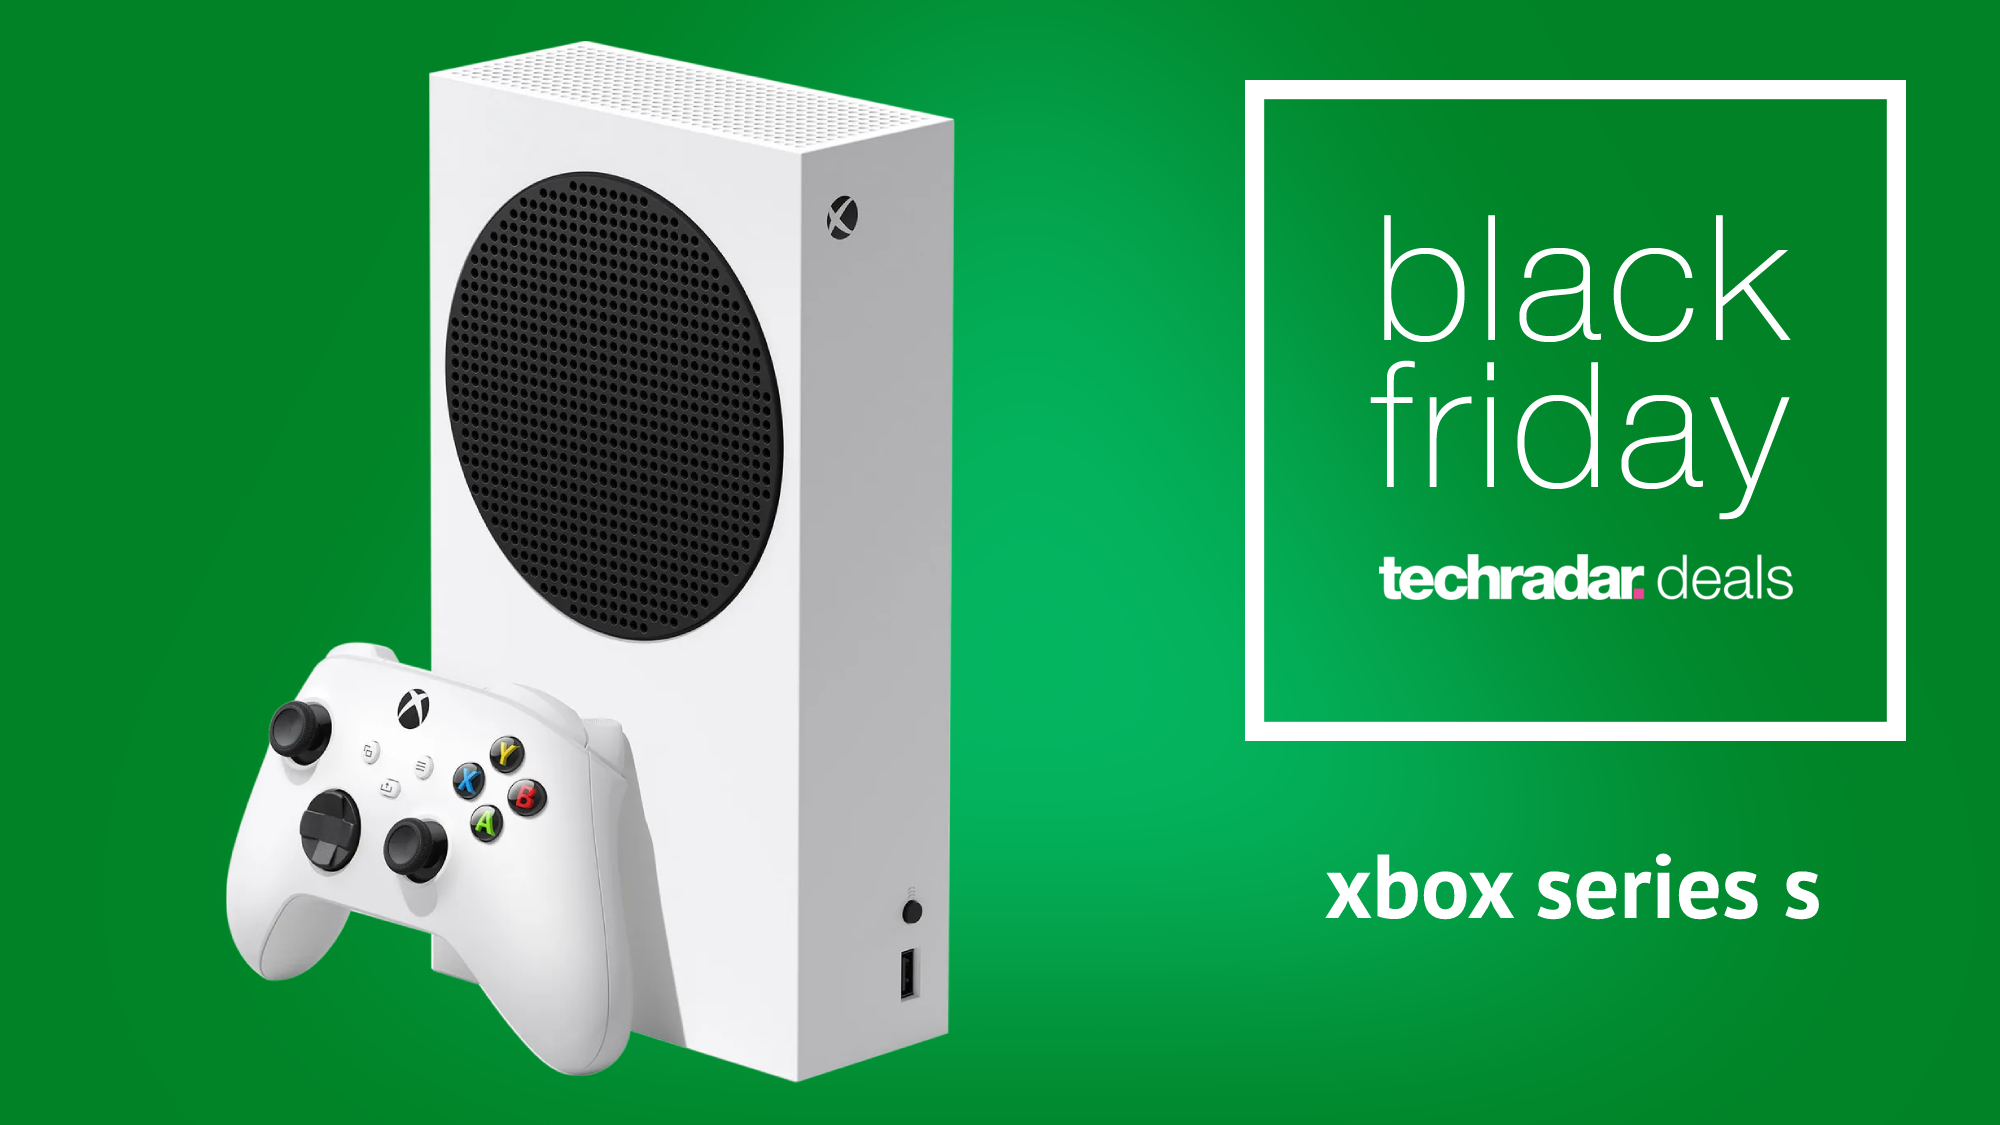 Xbox Series S Black Friday deal